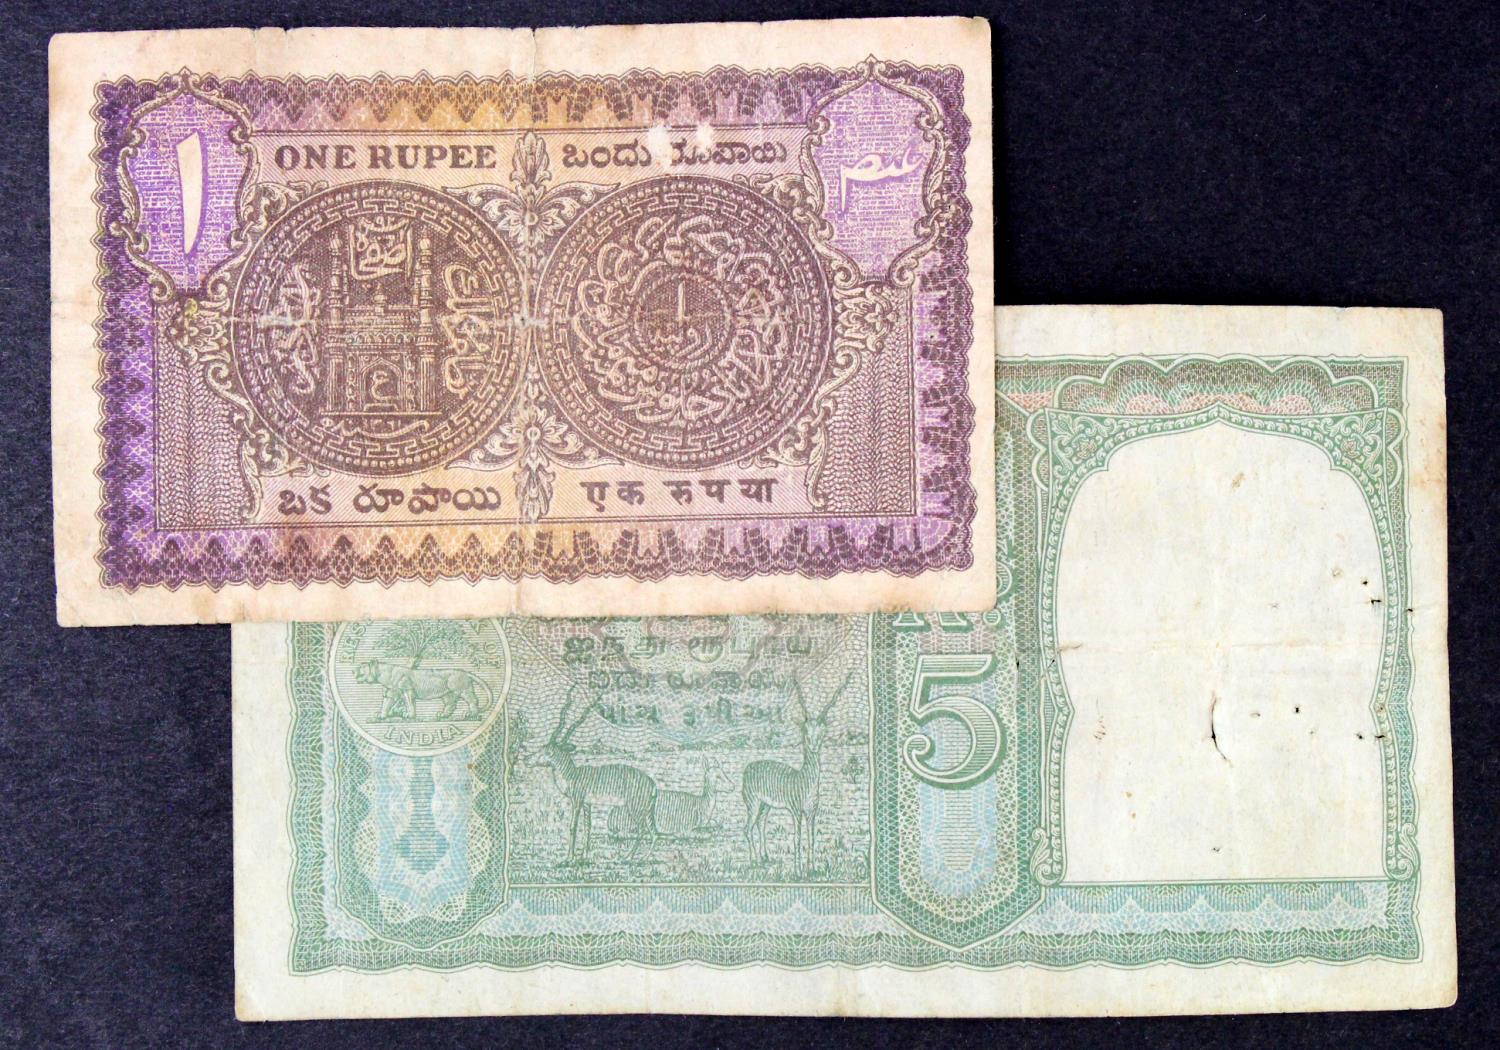 India (2), 5 Rupees issued 1943, signed C.D. Deshmukh, portrait King George VI at right, BLACK - Image 2 of 2